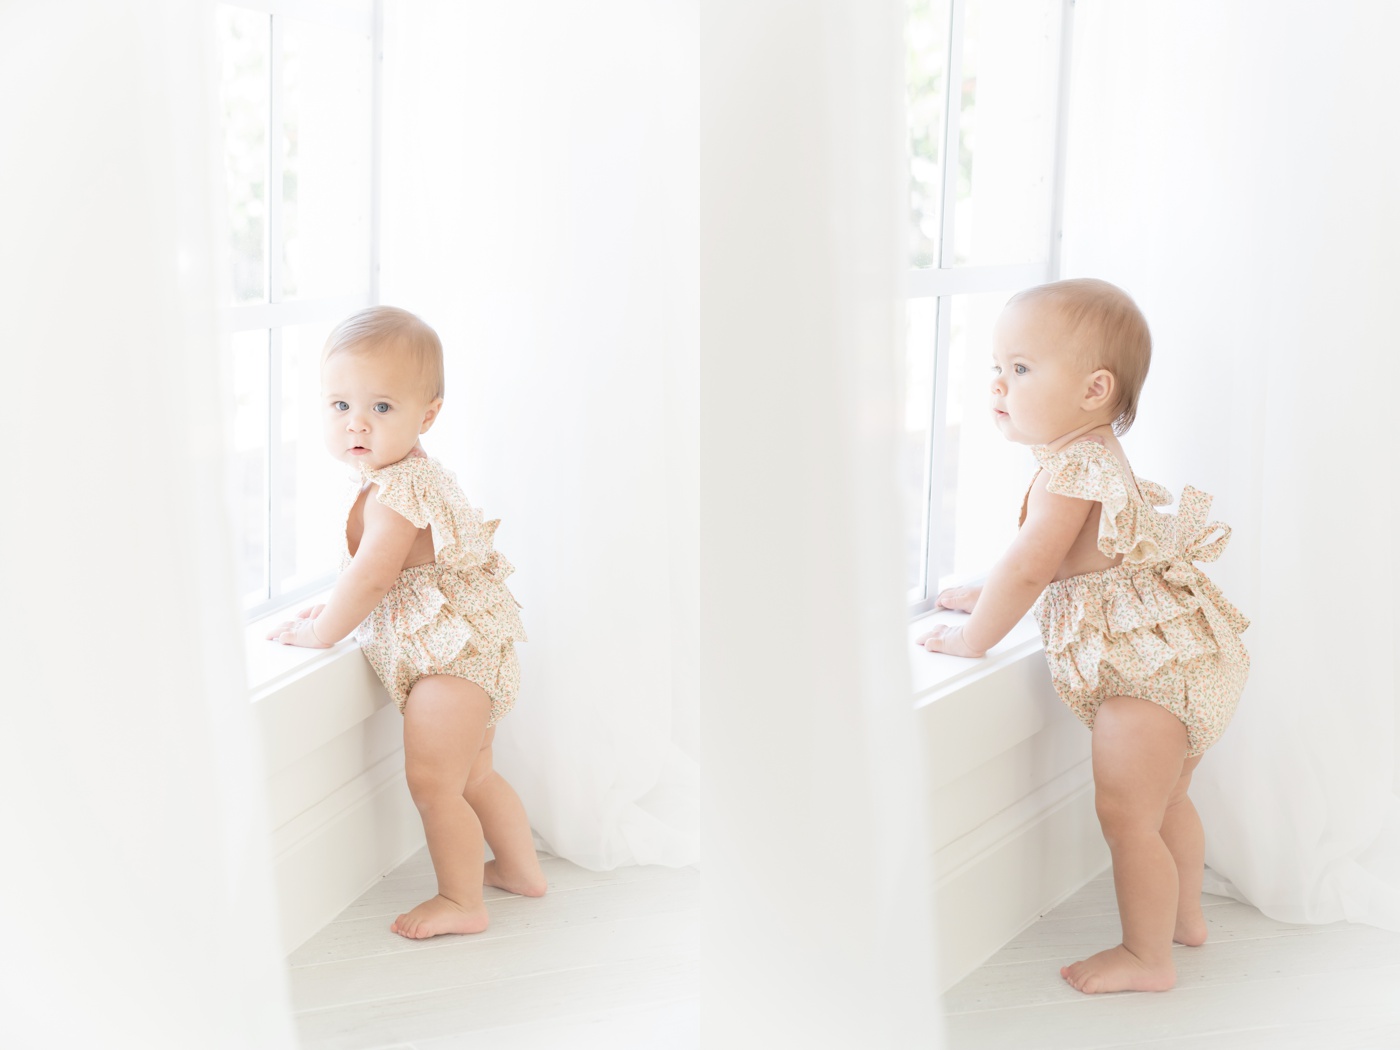 Baby ia floral romper being photographed in an all white Jupiter Fl photo studio by the window